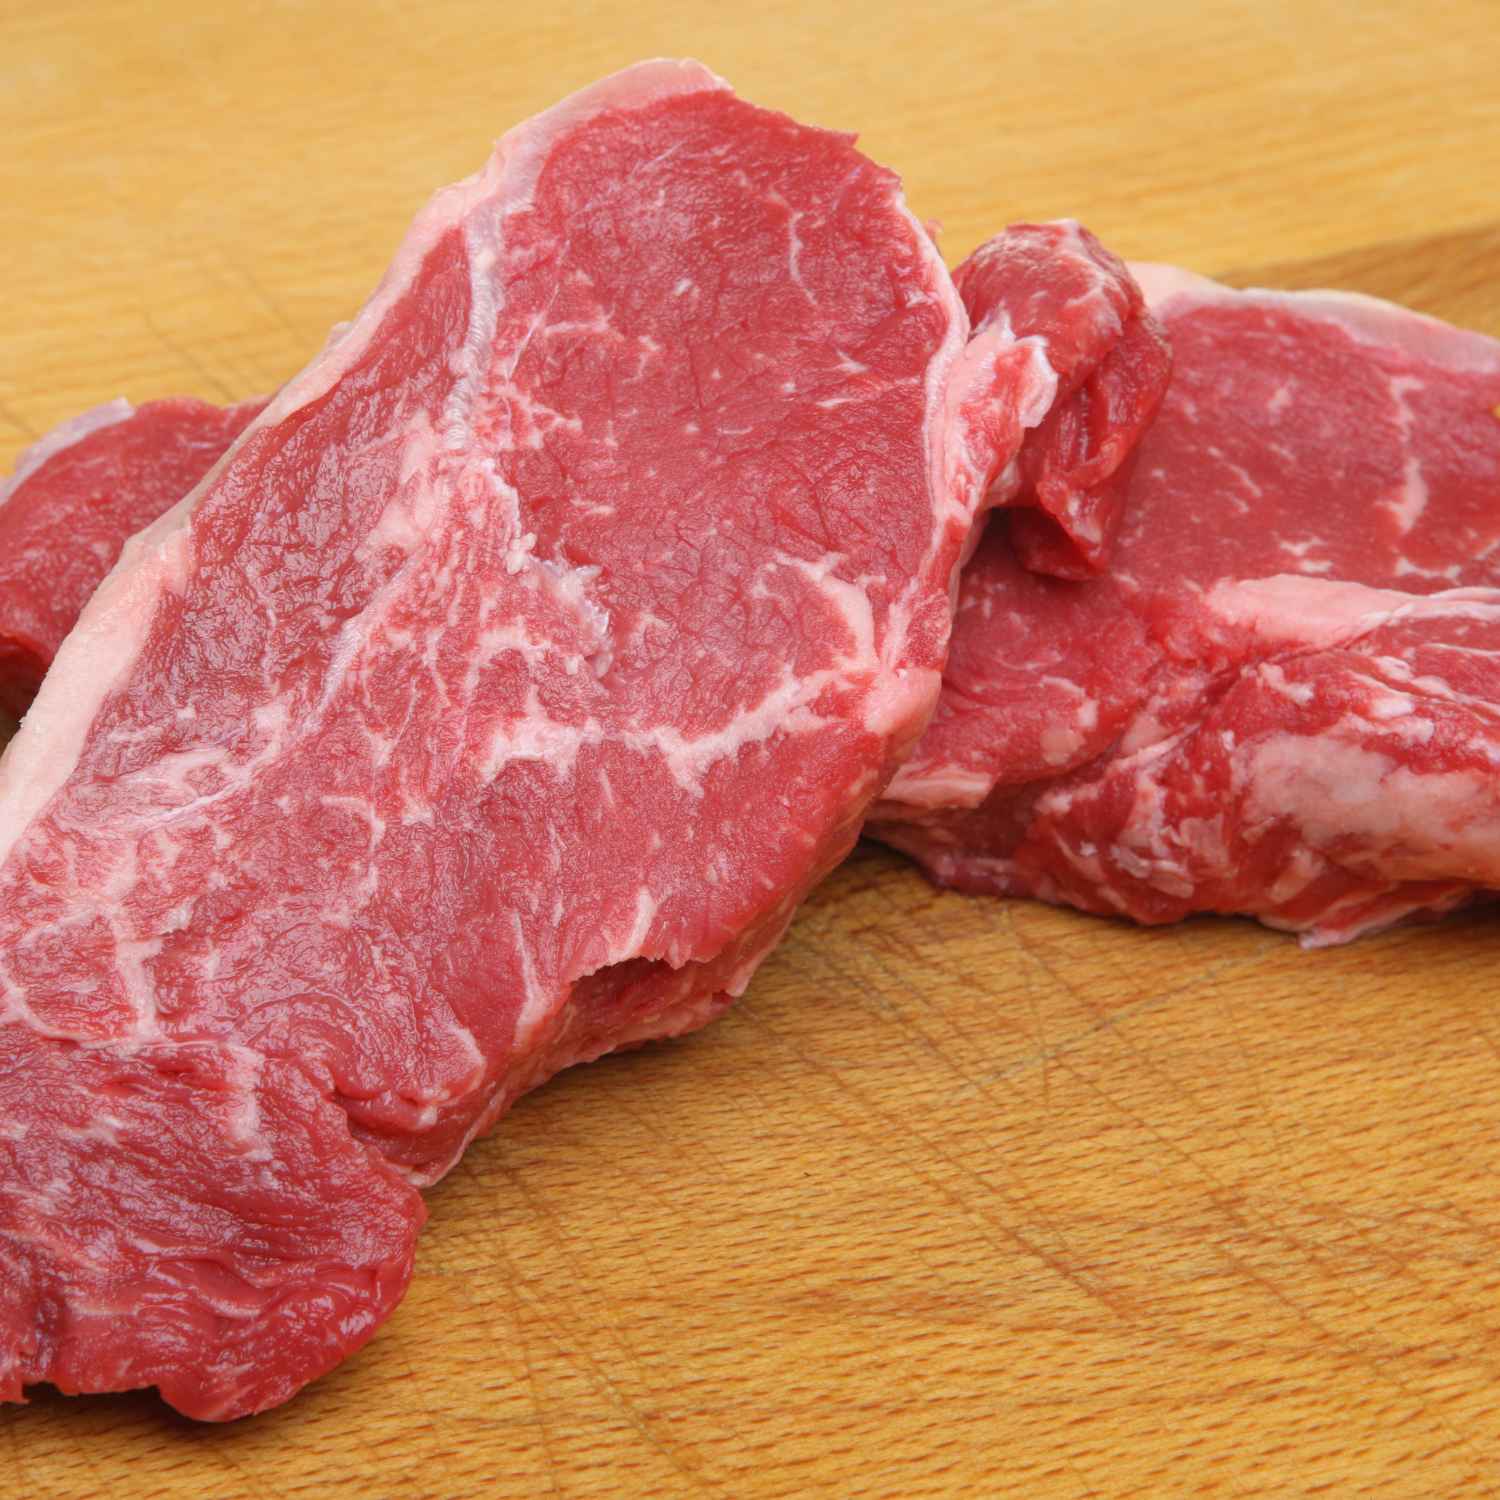 Grass Fed Beef - Premium Selection from Meat King